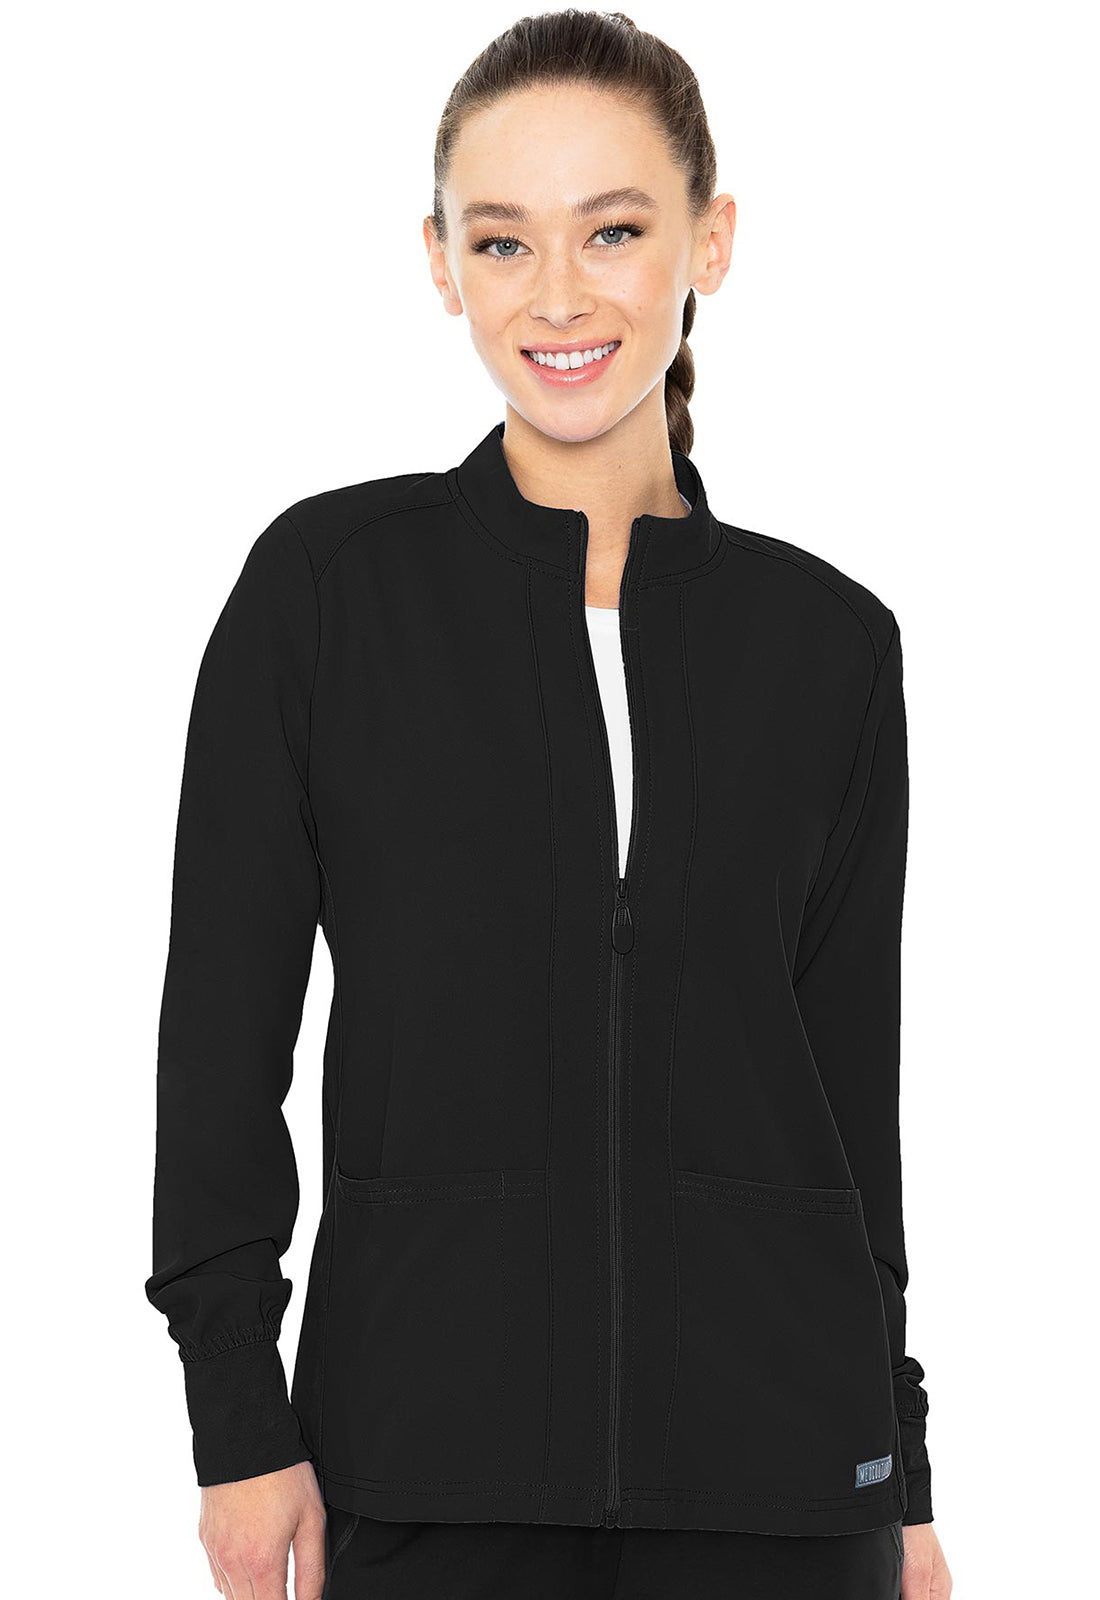 Med Couture Zip Front Warm-Up Jacket With Shoulder Yokes